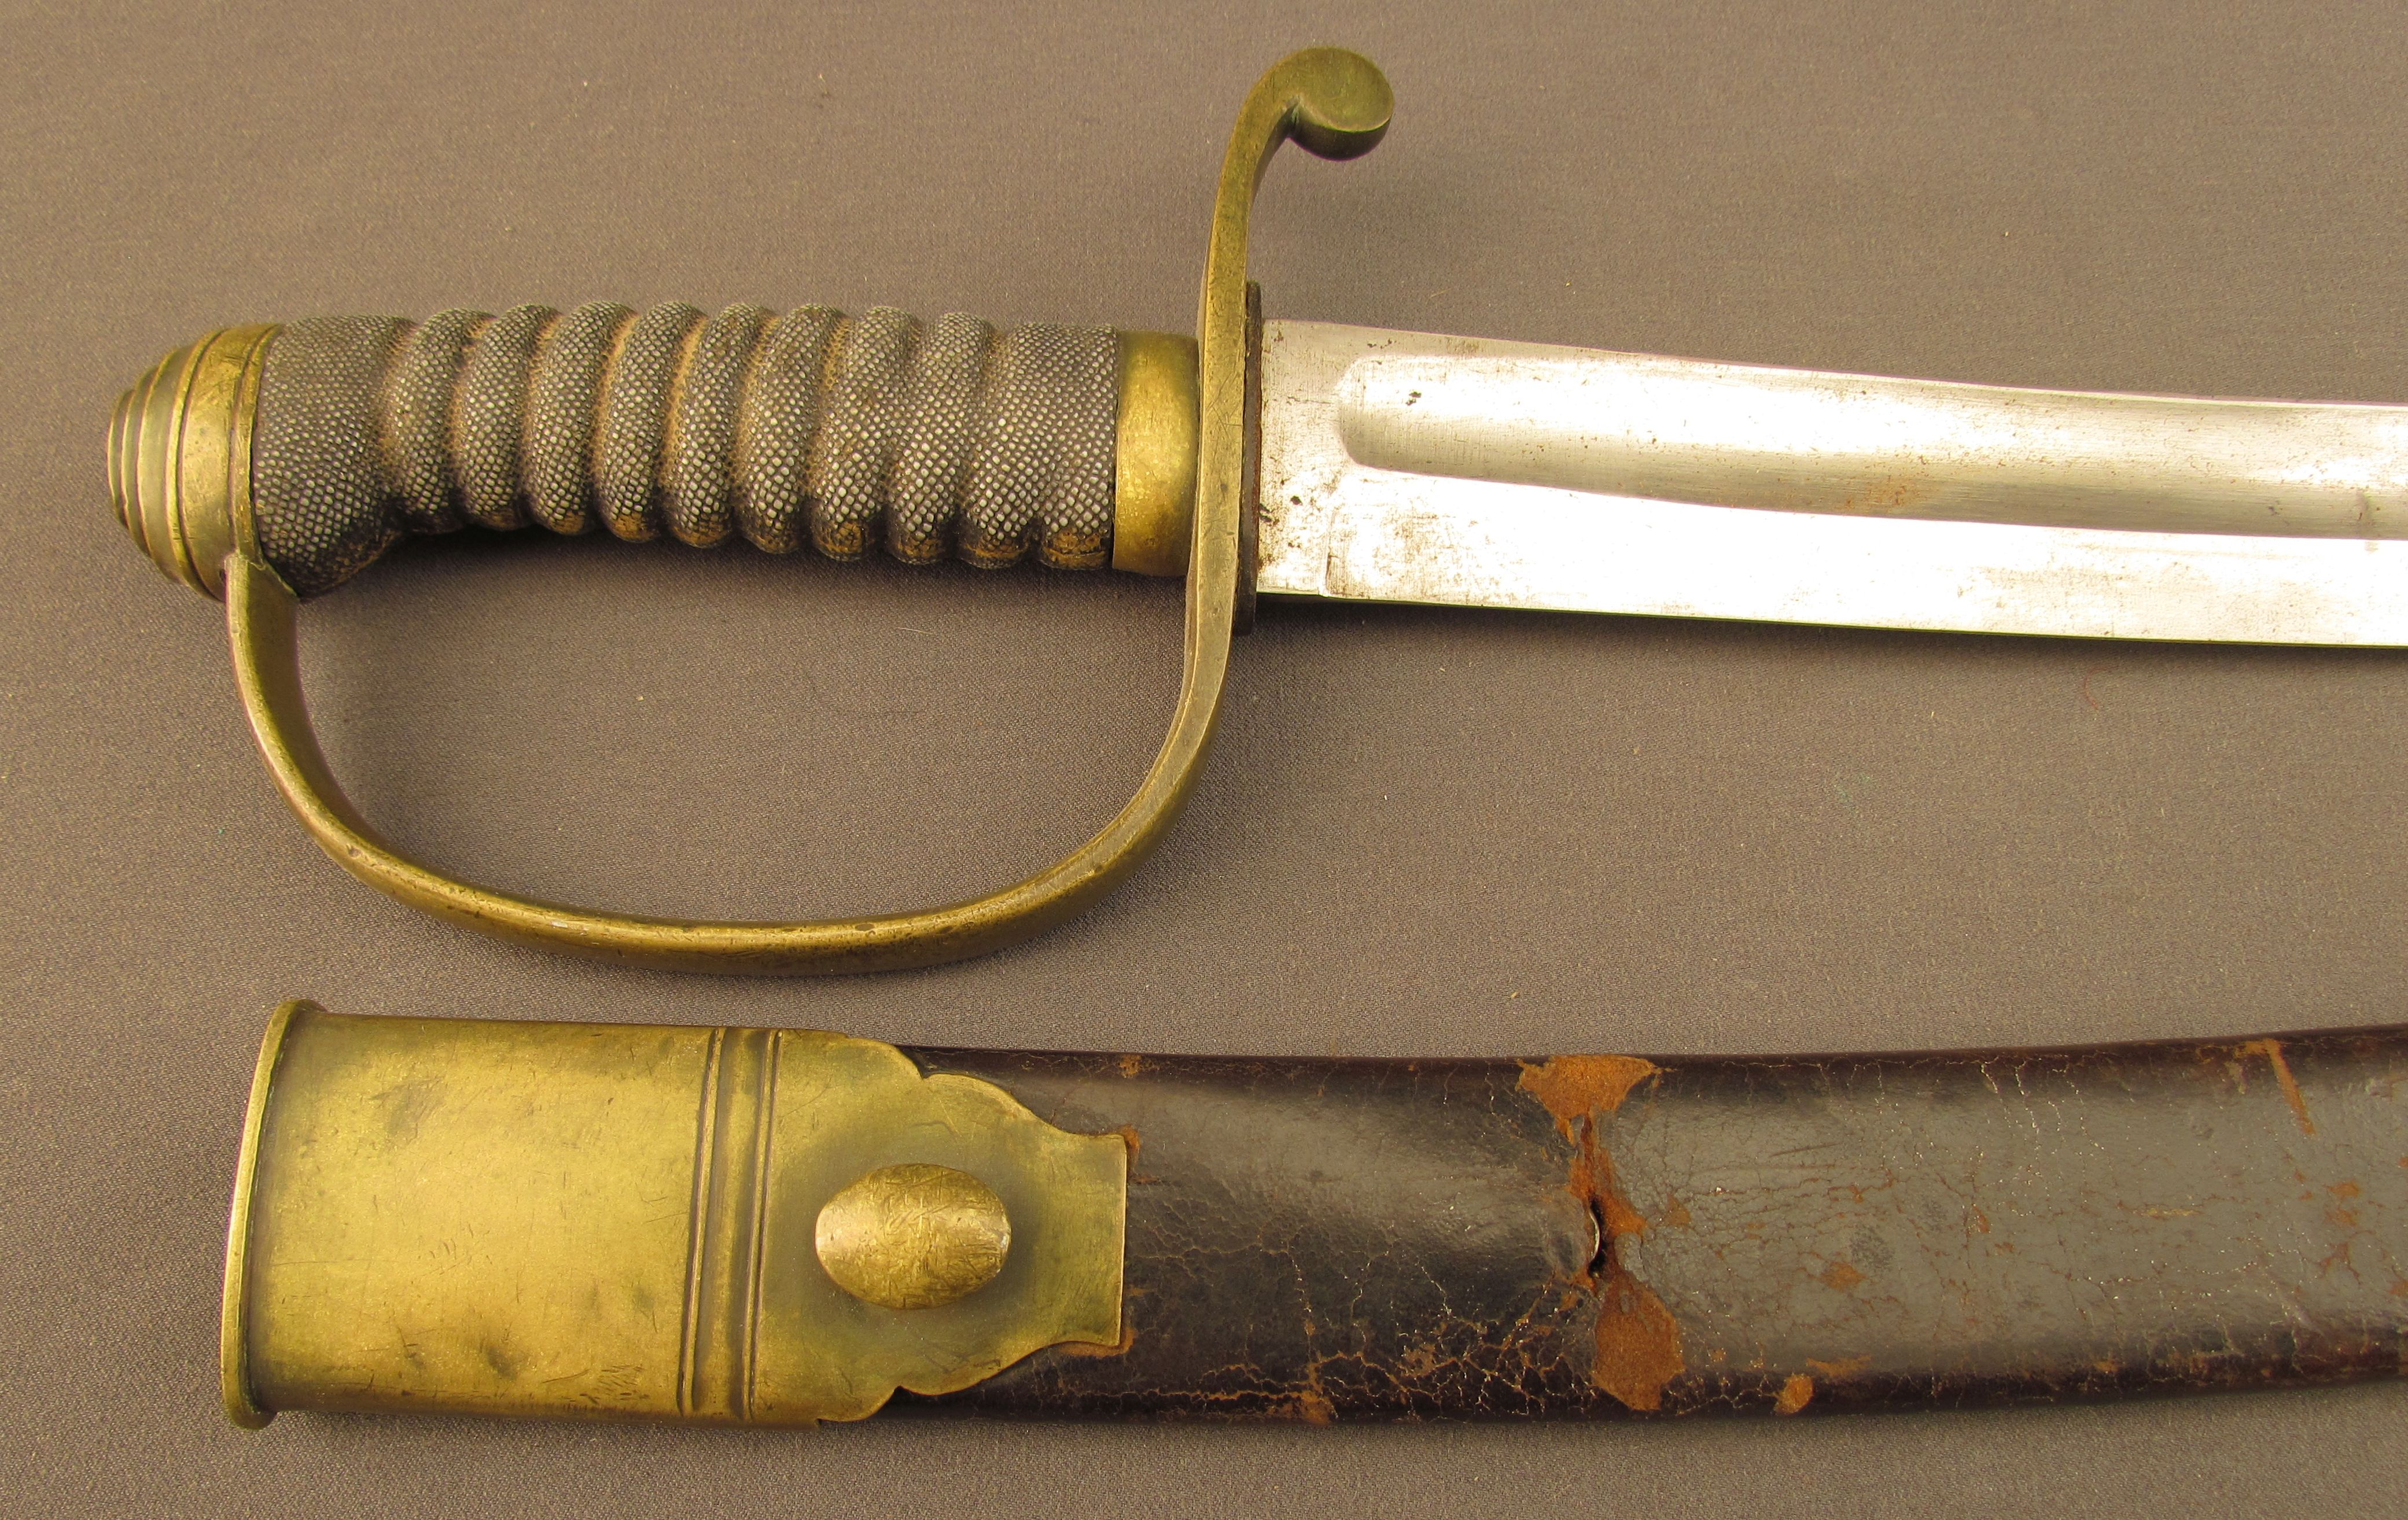 British Police Short Sword and Scabbard